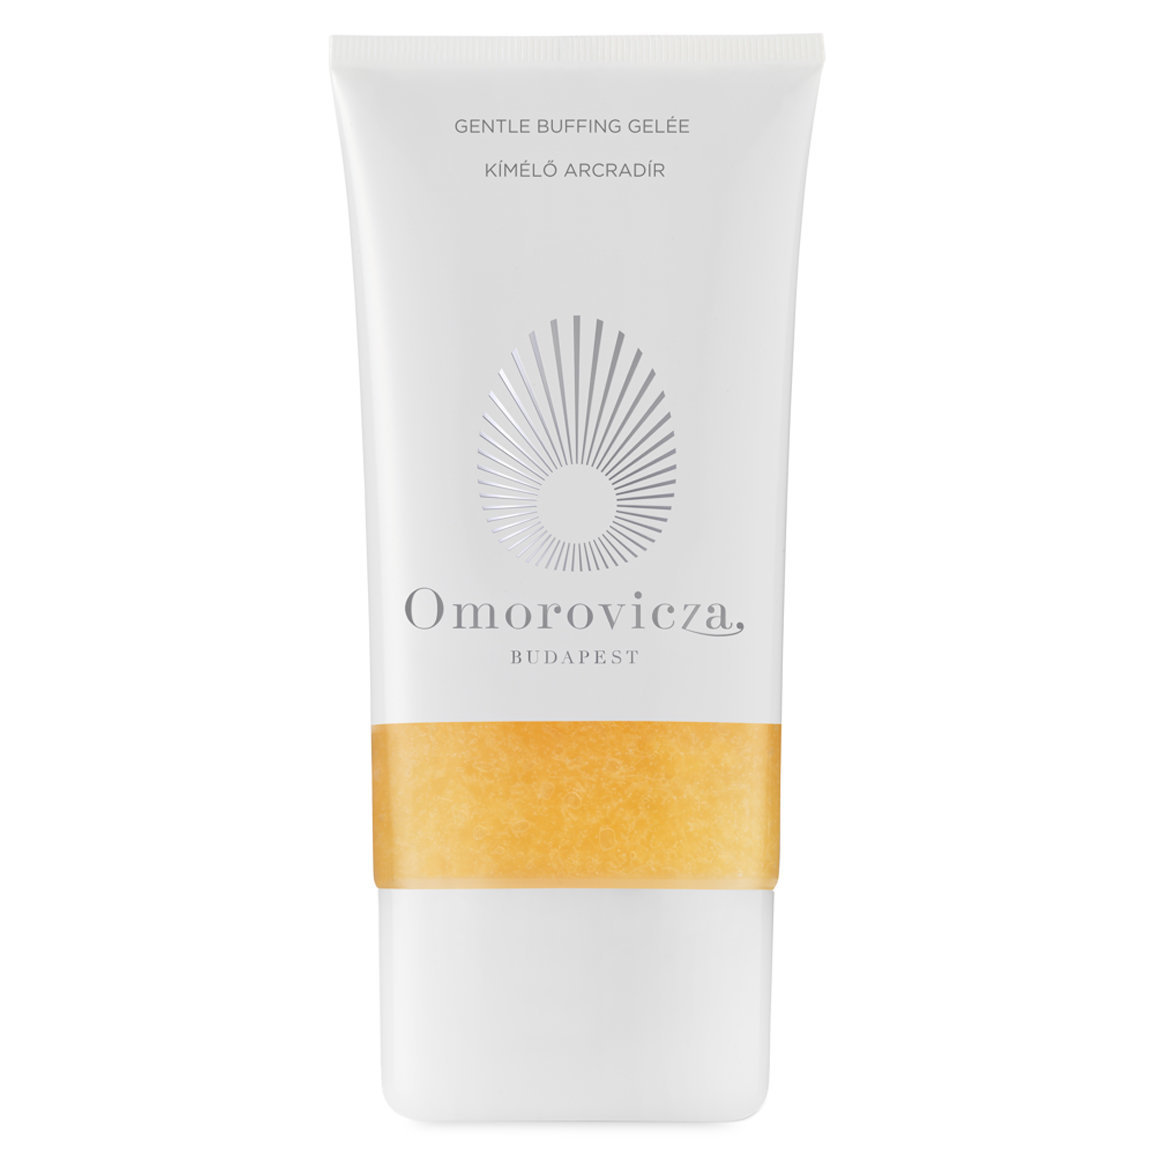 Omorovicza Gentle Buffing Gelée alternative view 1 - product swatch.